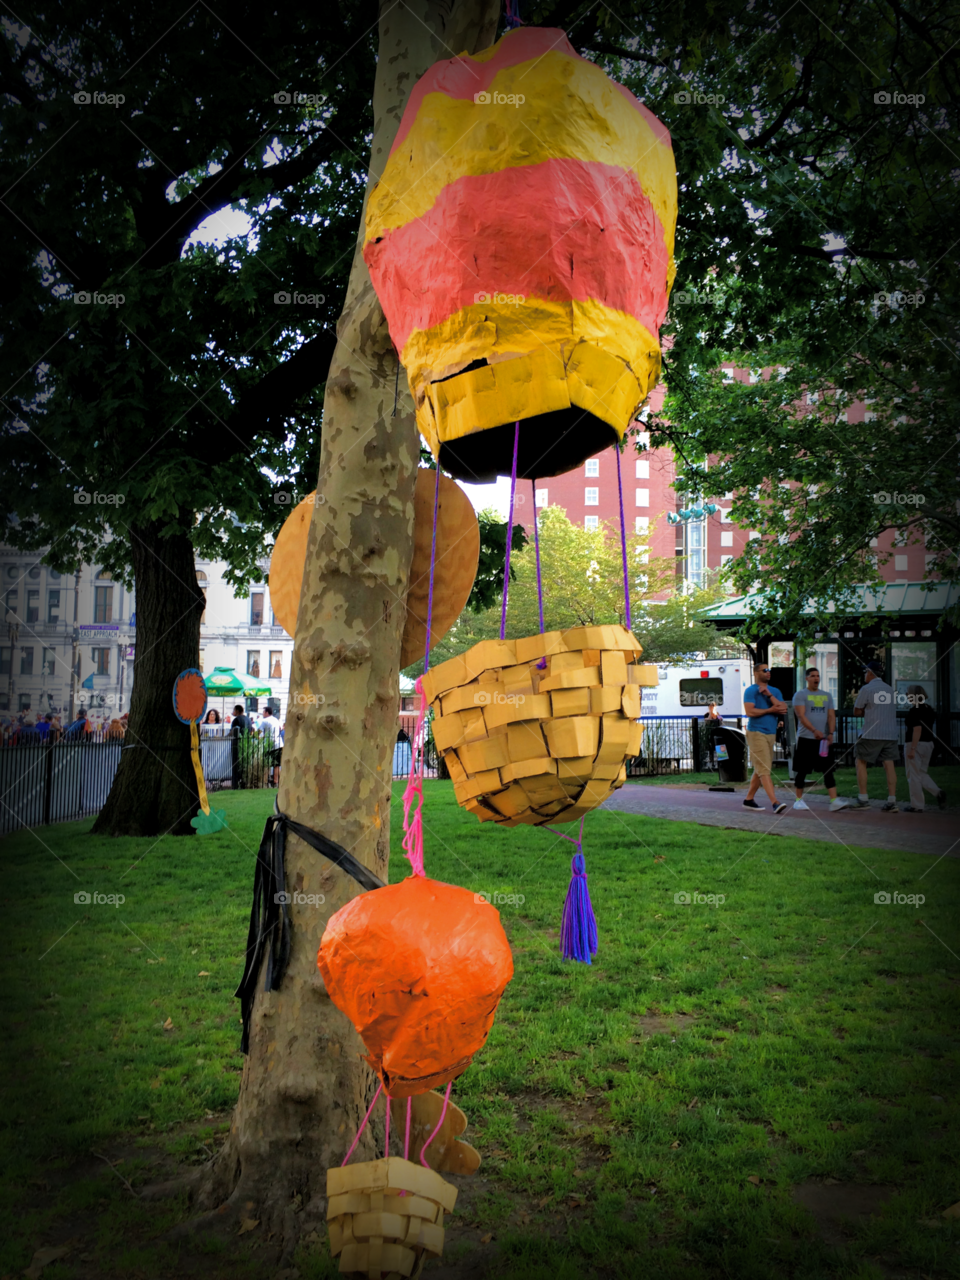 Smallest Airship.
Hop aboard an air ballon and sail away to the furthest reaches of your imagination! Found at the arts festival in Providence, RI.